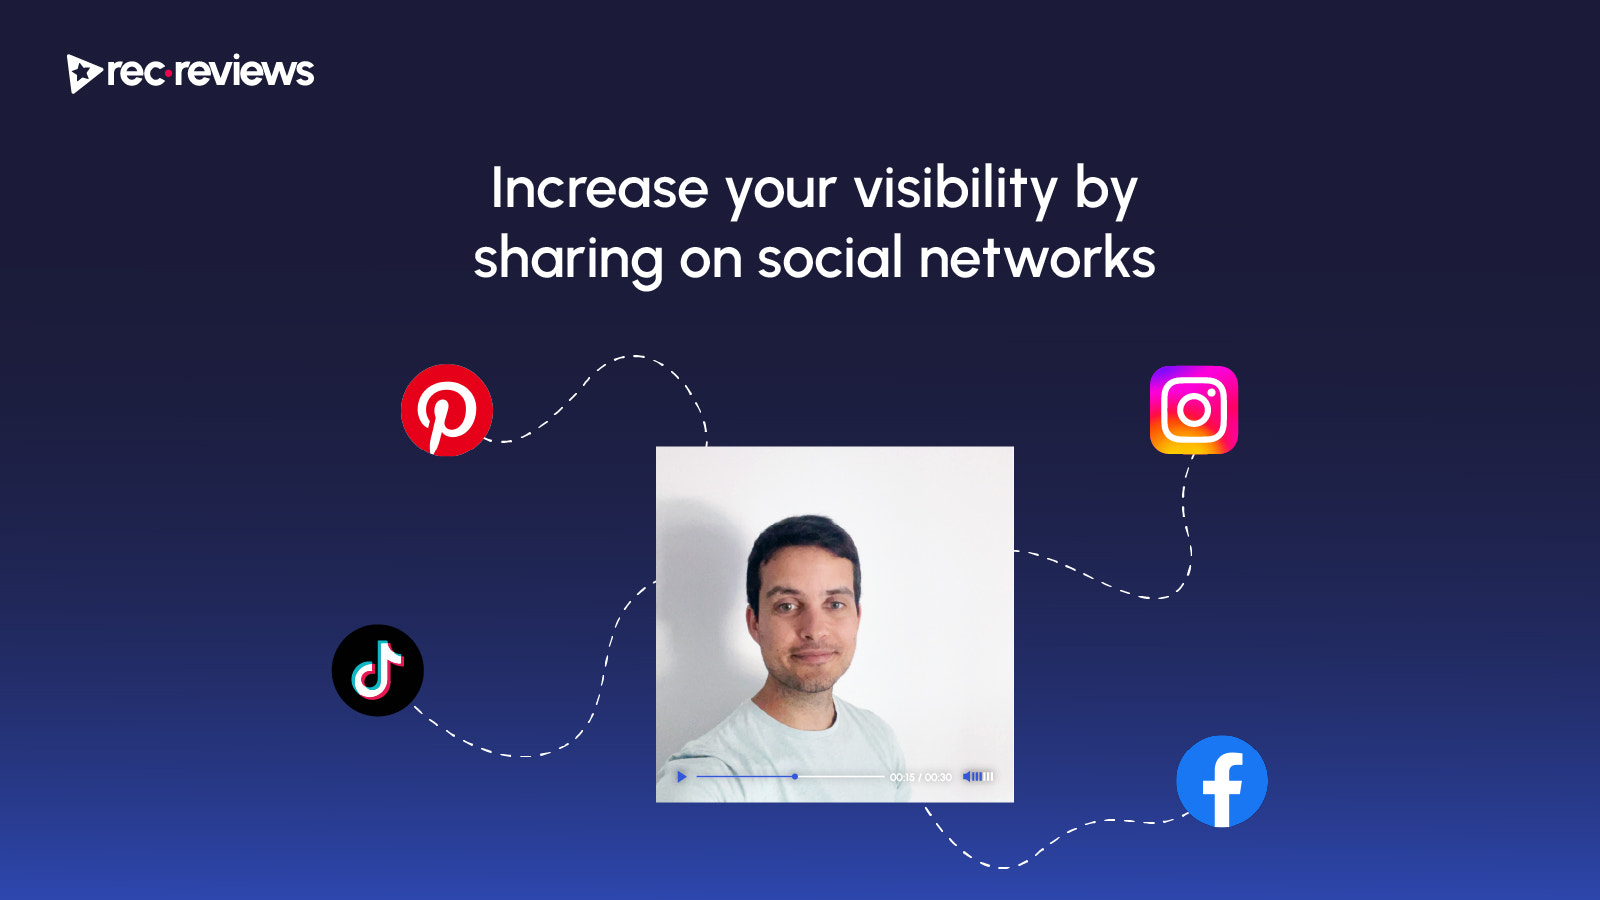 Increase your visibility by sharing on social networks